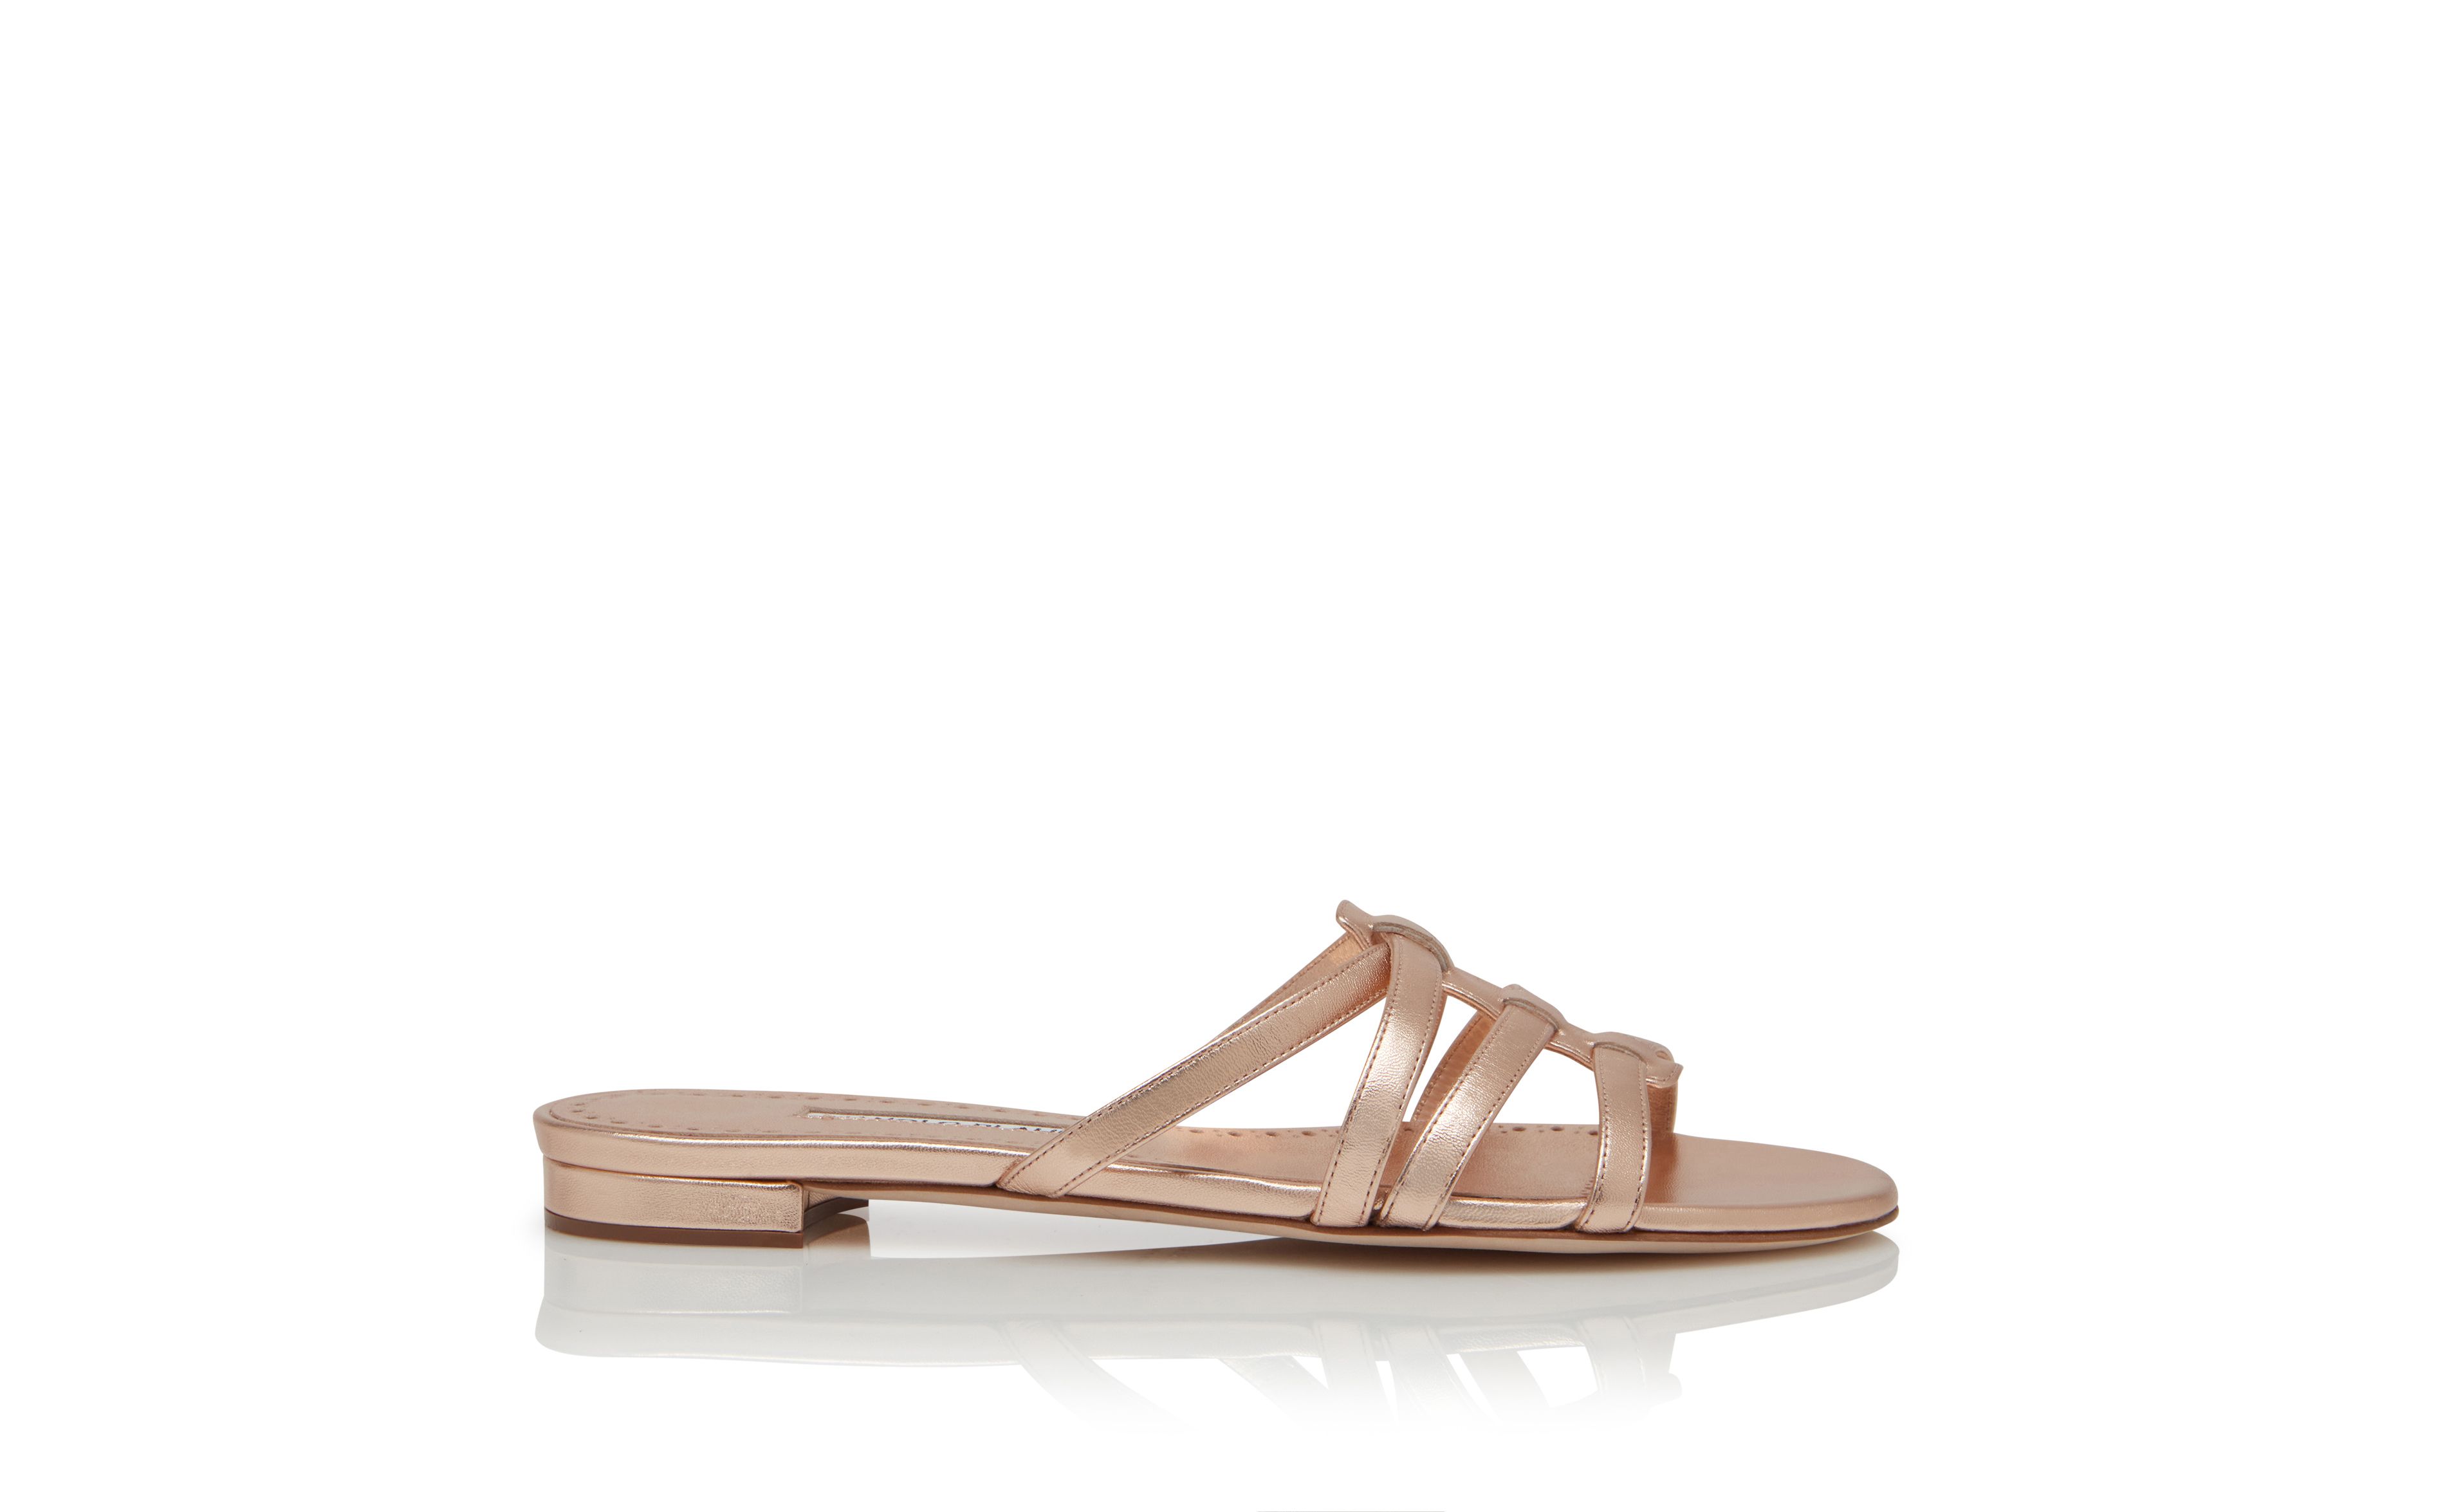 Designer Copper Nappa Leather Sandals - Image Side View